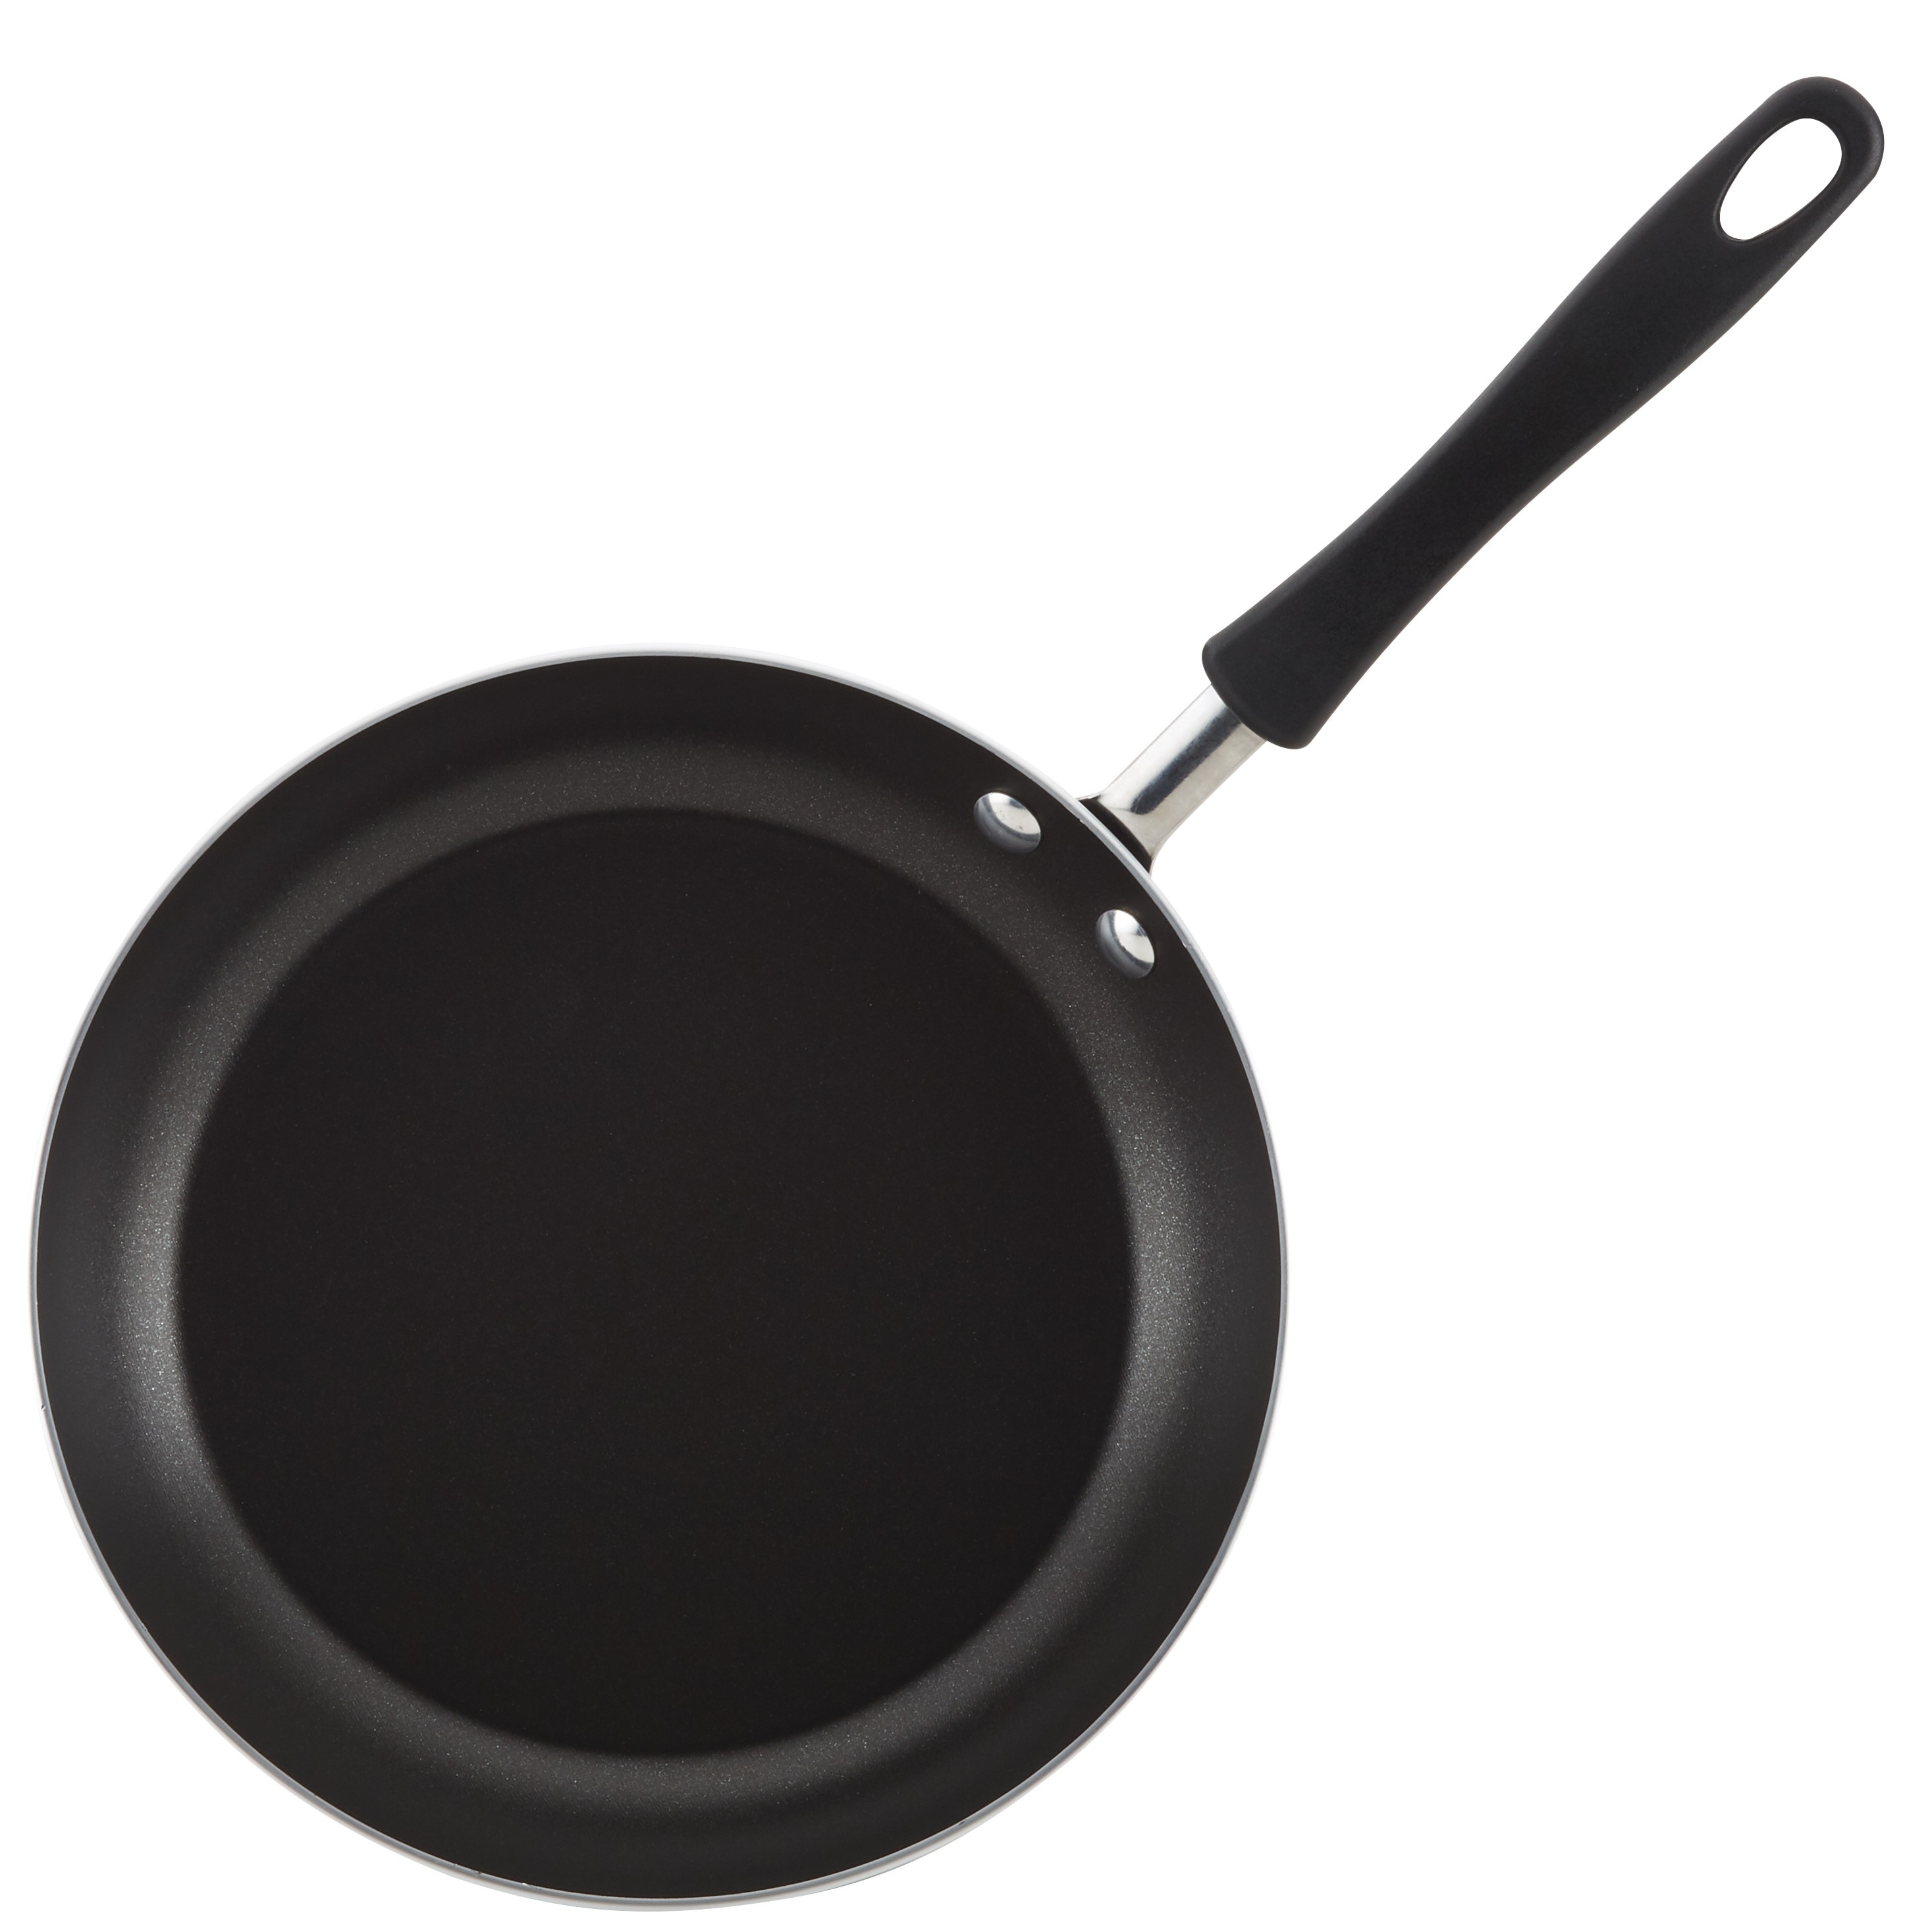 https://ak1.ostkcdn.com/images/products/is/images/direct/f0787b1dd29f7741ad1bd5dc9e0a944d266ce7c7/Farberware-Cookstart-Aluminum-DiamondMax-Nonstick-Skillet-Set%2C-8.25-inch-and-10-inch%2C-2-Piece.jpg